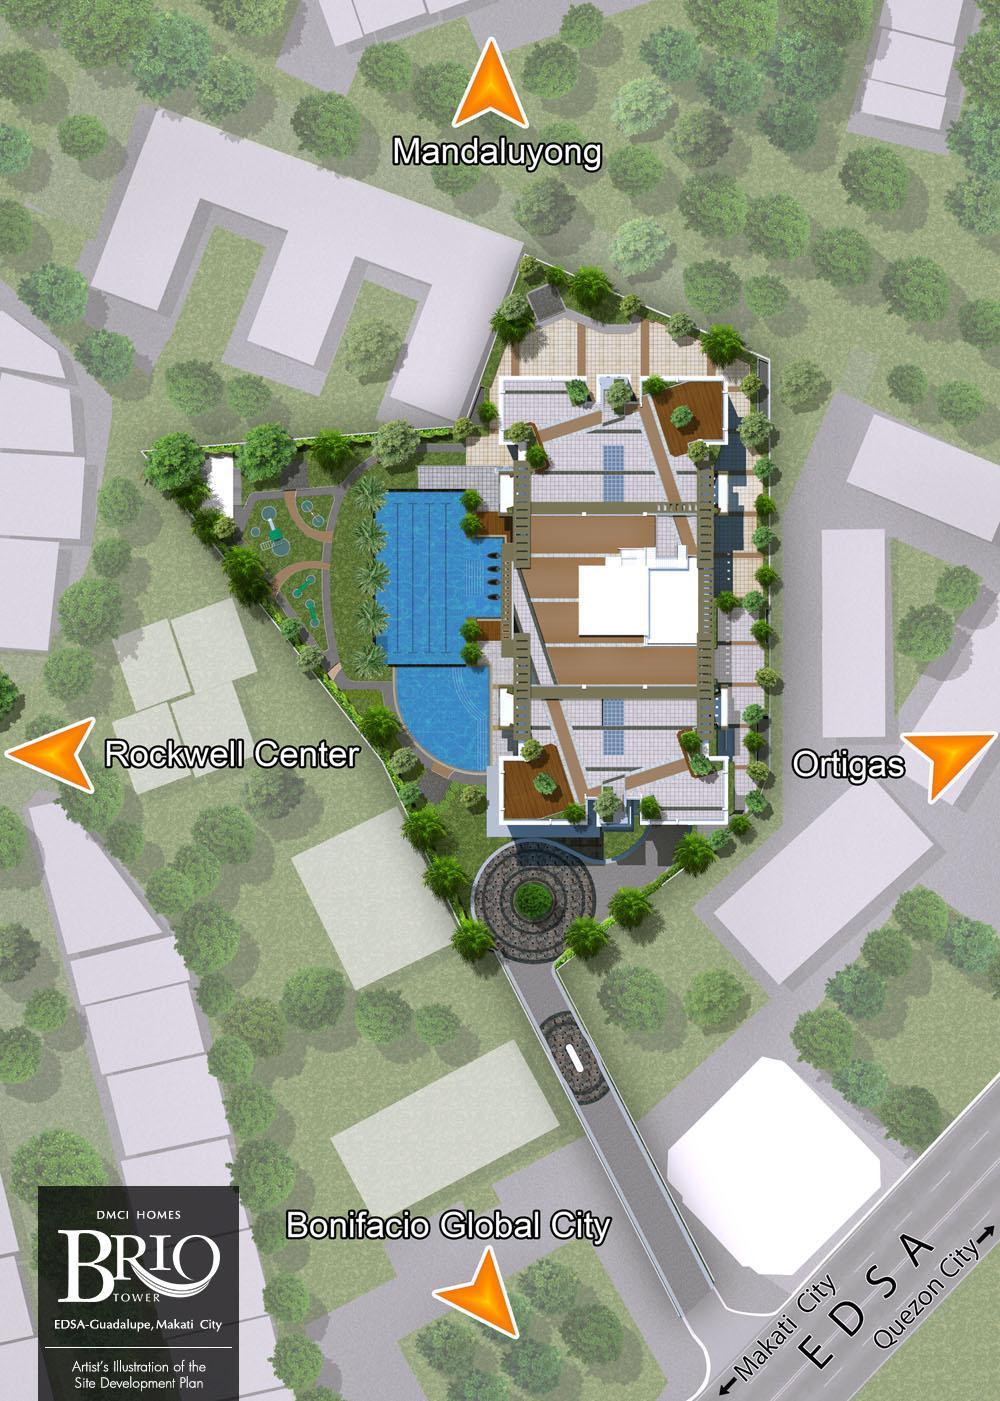 SITE PLAN Land Area Development Type 5,760 square meters 1 High Rise Residential Tower 30 Residential Floors 5 Basement